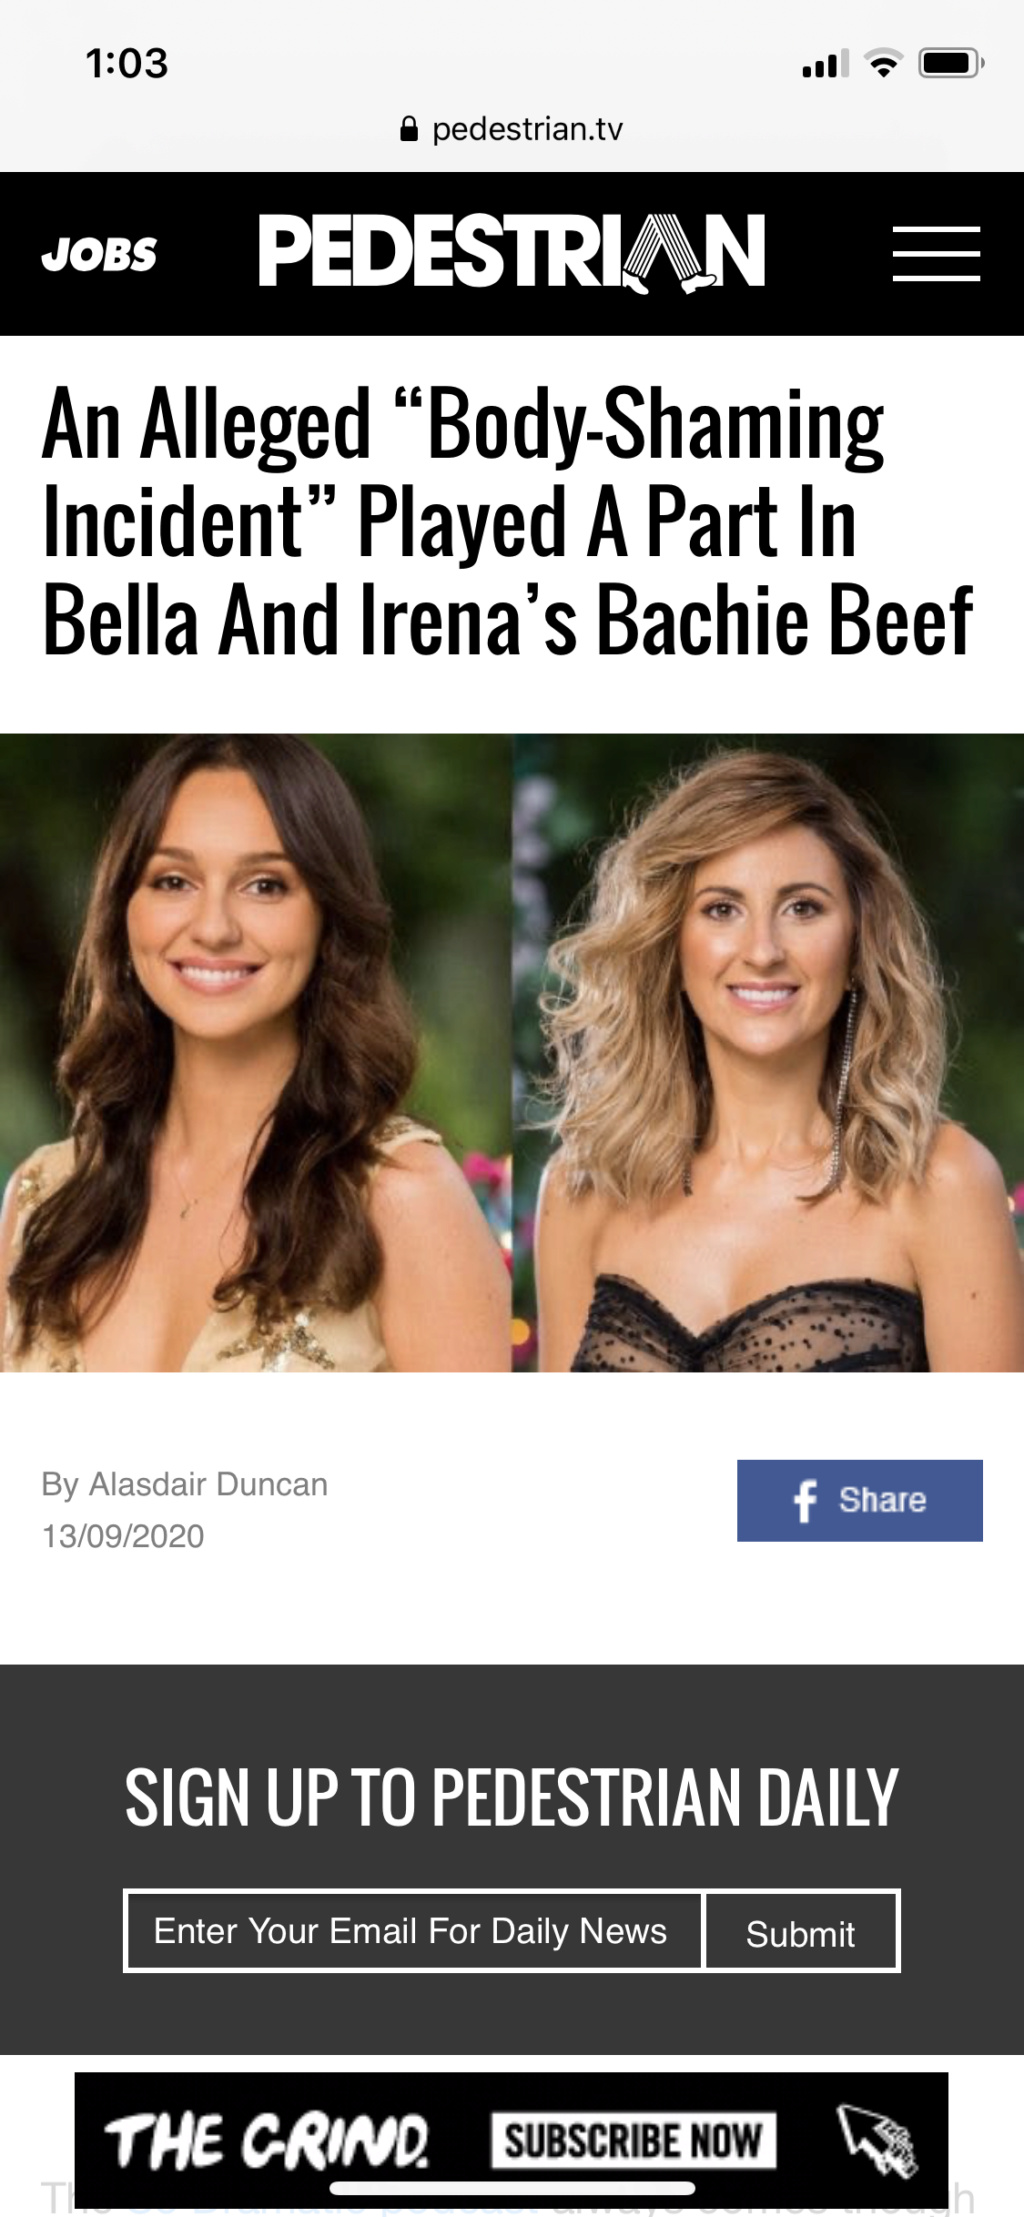 Bachelor Australia - Season 8 - Locky Gilbert - Episodes - Discussion - *Sleuthing Spoilers* - Page 53 5b1c6710